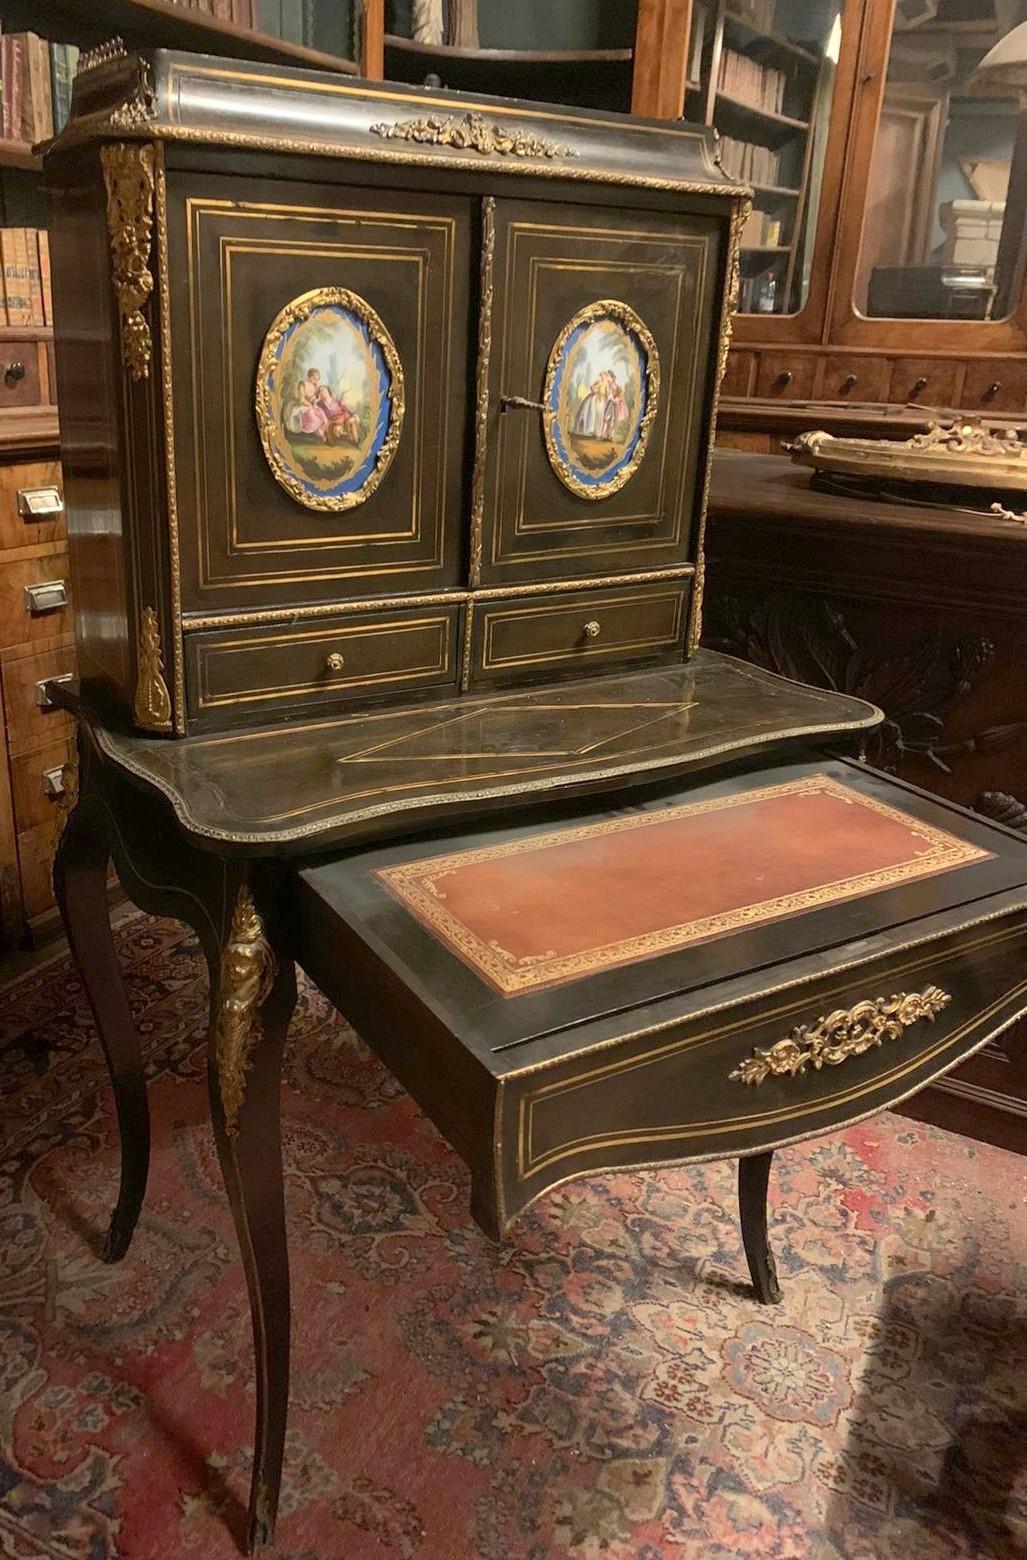 Antique writing desk with raised doors, enriched with bronze and brass ornaments and ovens with ceramics from Sèvres (France) on doors, has a very beautiful and complete removable top, built and decorated in the second half of the 19th century, in